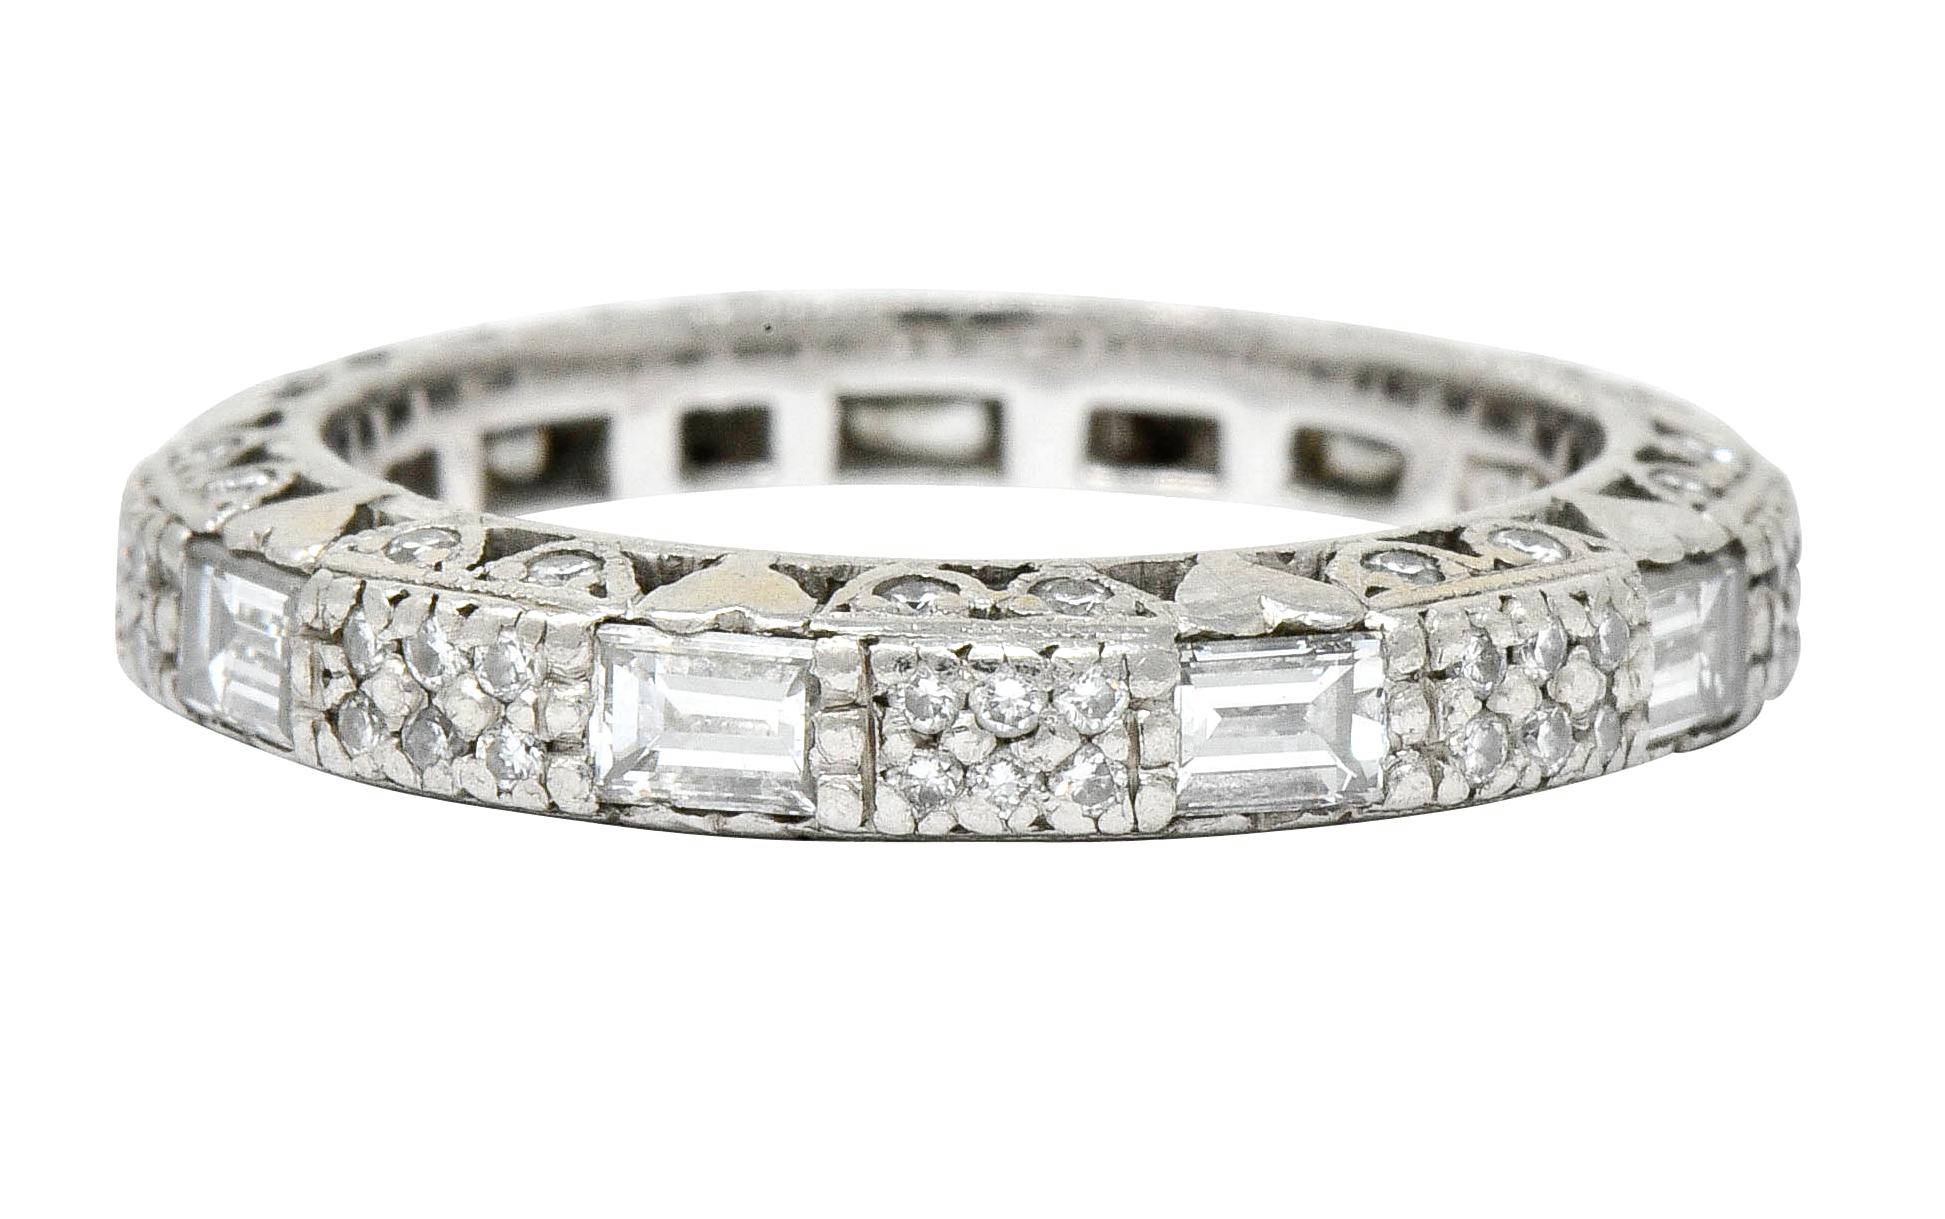 Eternity style band designed as segments of pavè diamonds alternating with flush set baguette cut diamonds

With a profile comprised of a pierced heart motif accented by bead set round brilliant cut diamonds

Total diamond weight is approximately